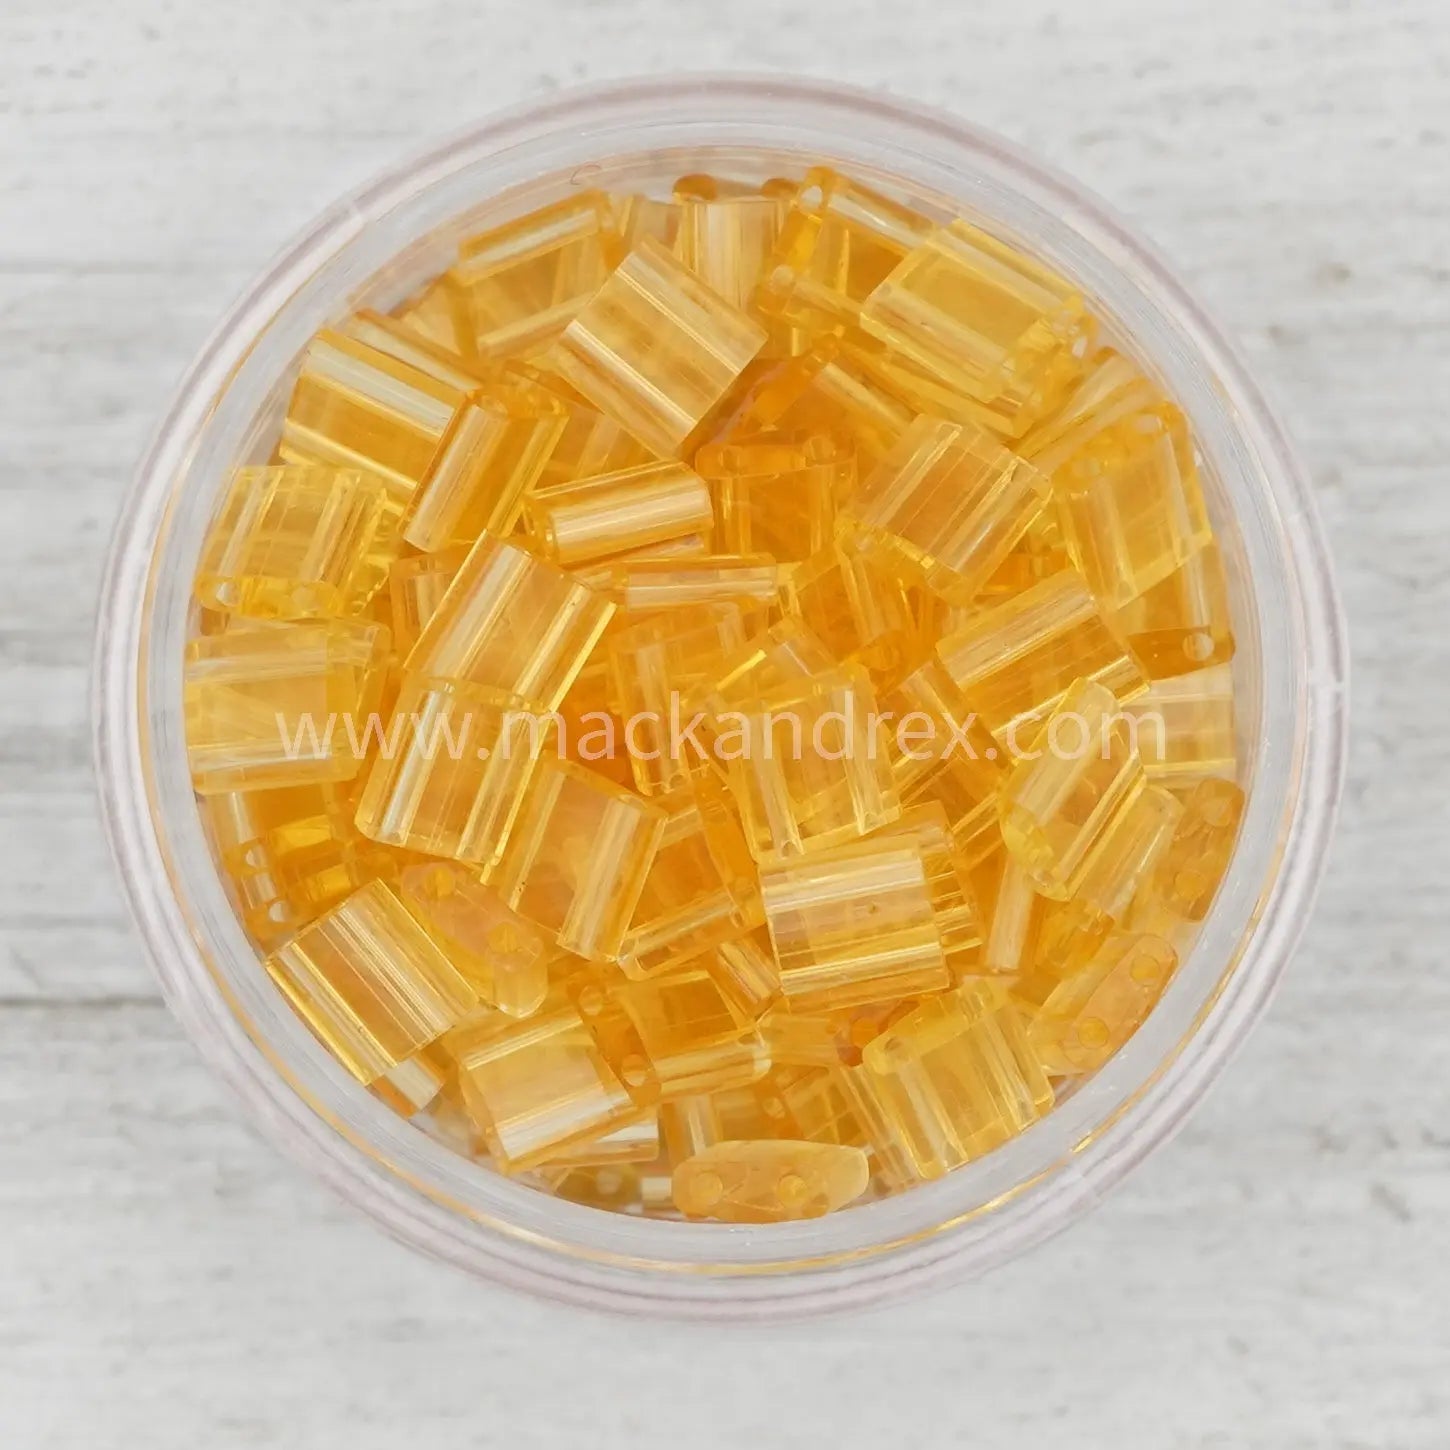 a glass bowl filled with yellow glass cubes